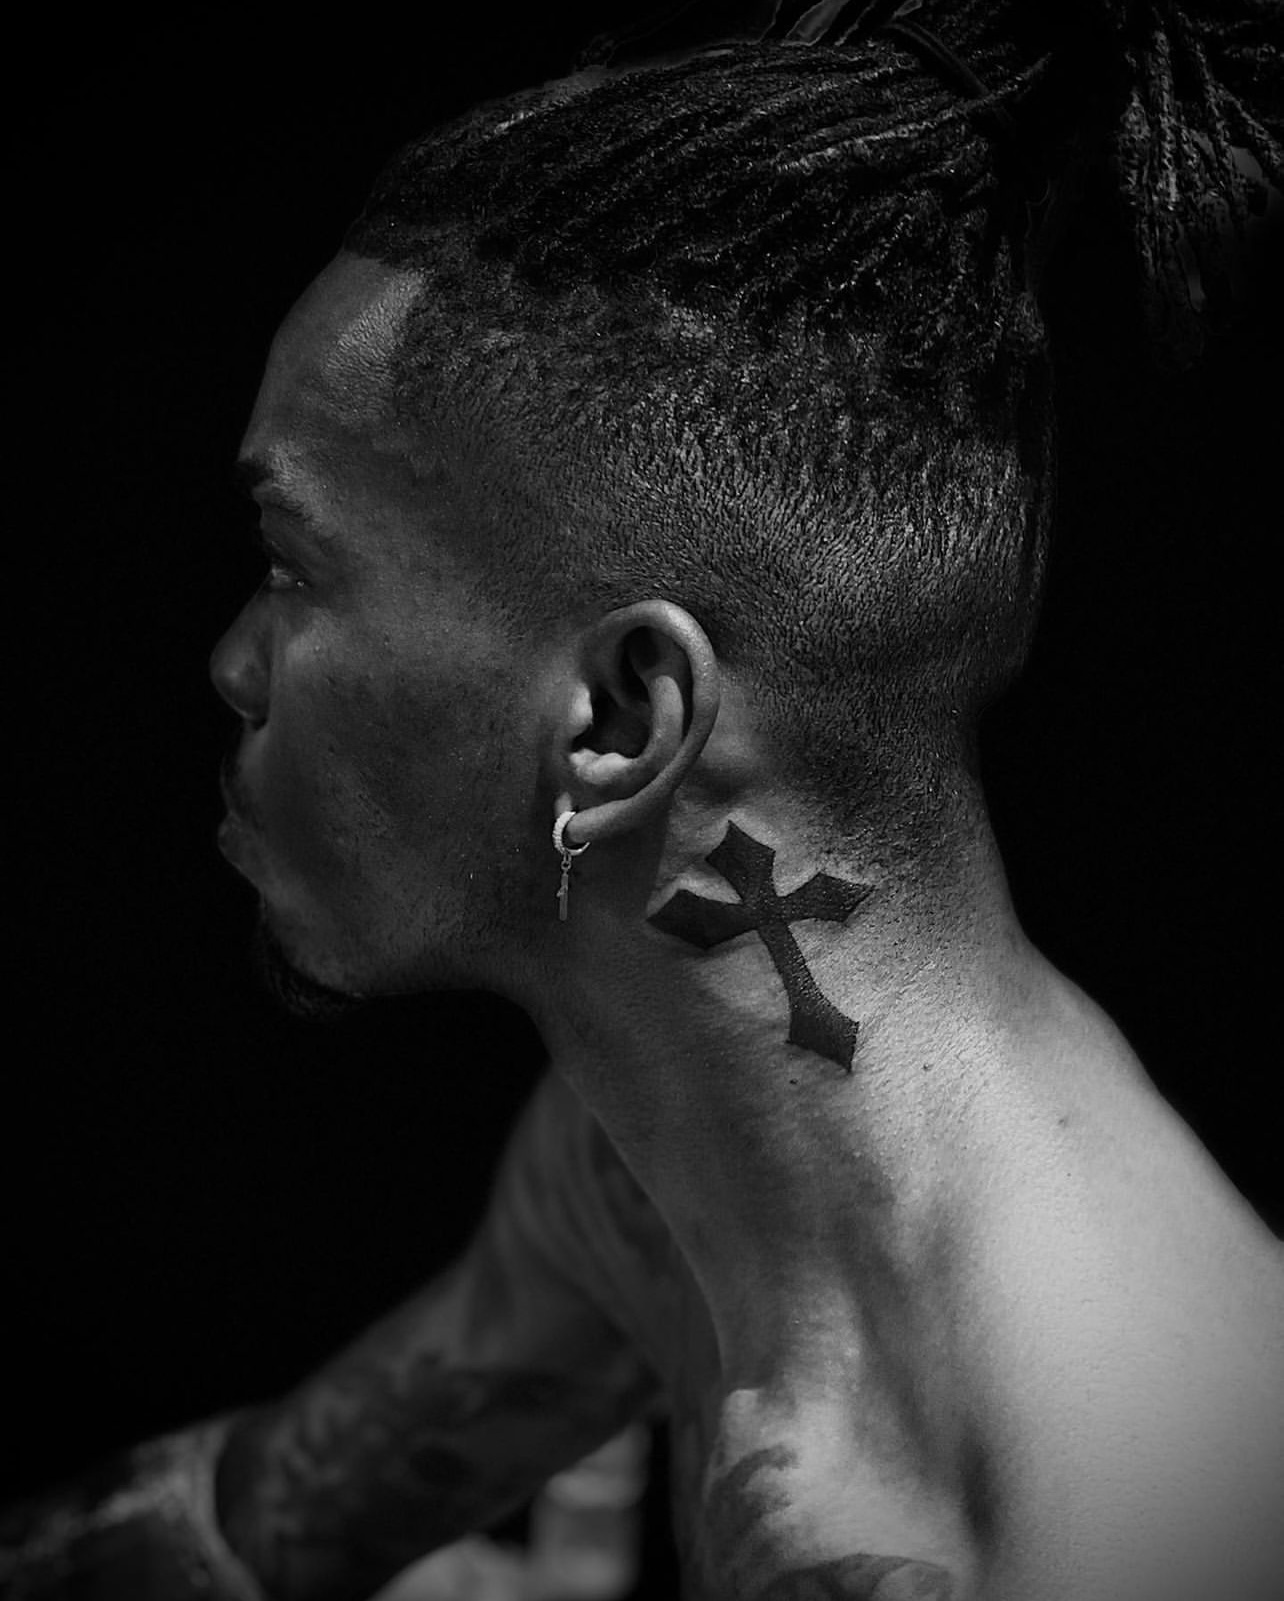 Dream chaser” and feather tattoo on Neymar's neck. | Neymar neck tattoo,  Neymar jr tattoos, Neck tattoo